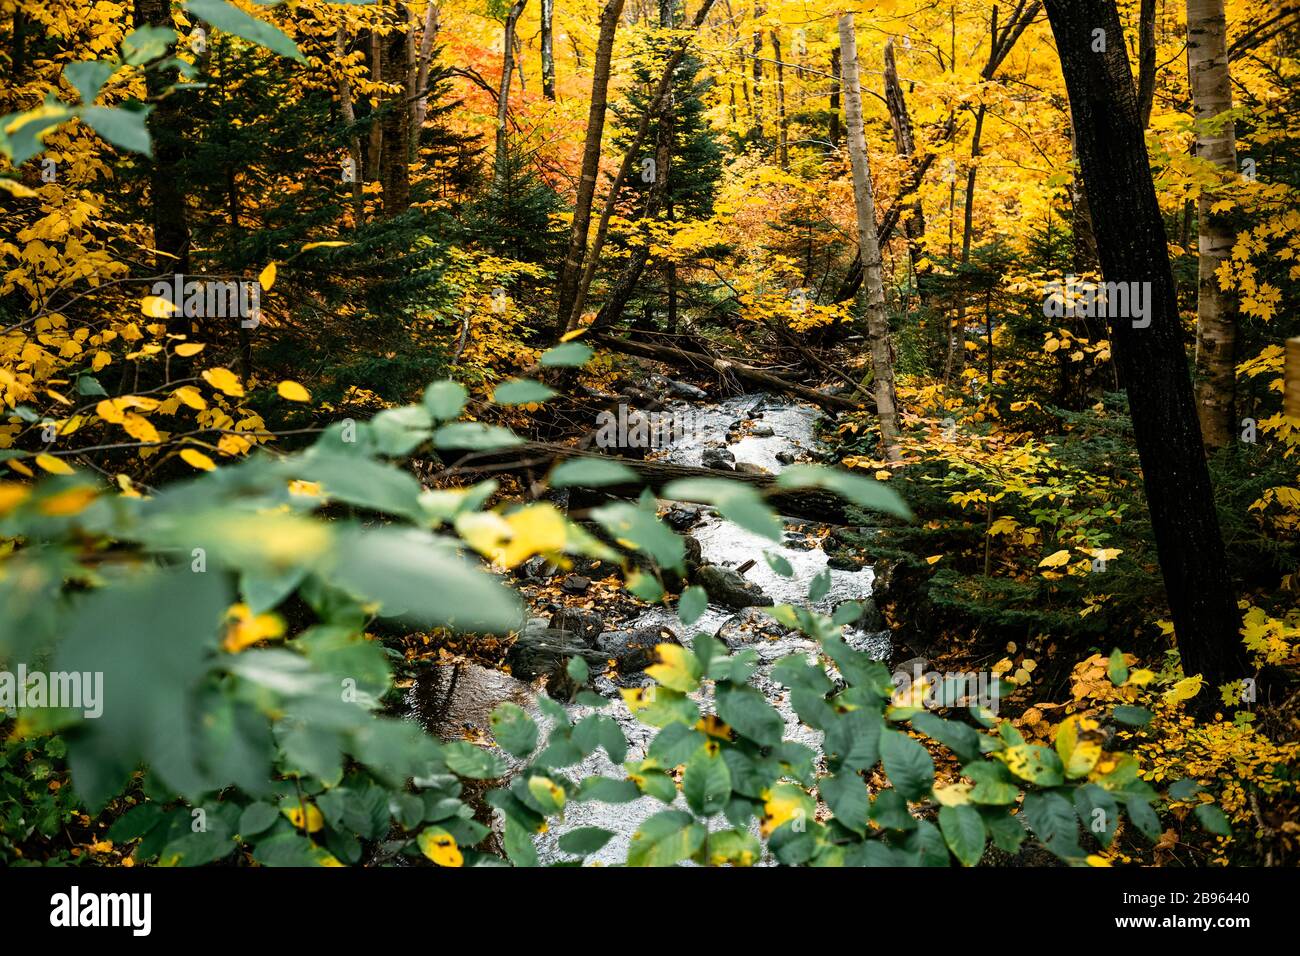 Tranquil stream runs through the middle of a colorful forest during peak autumn foliage. Stock Photo